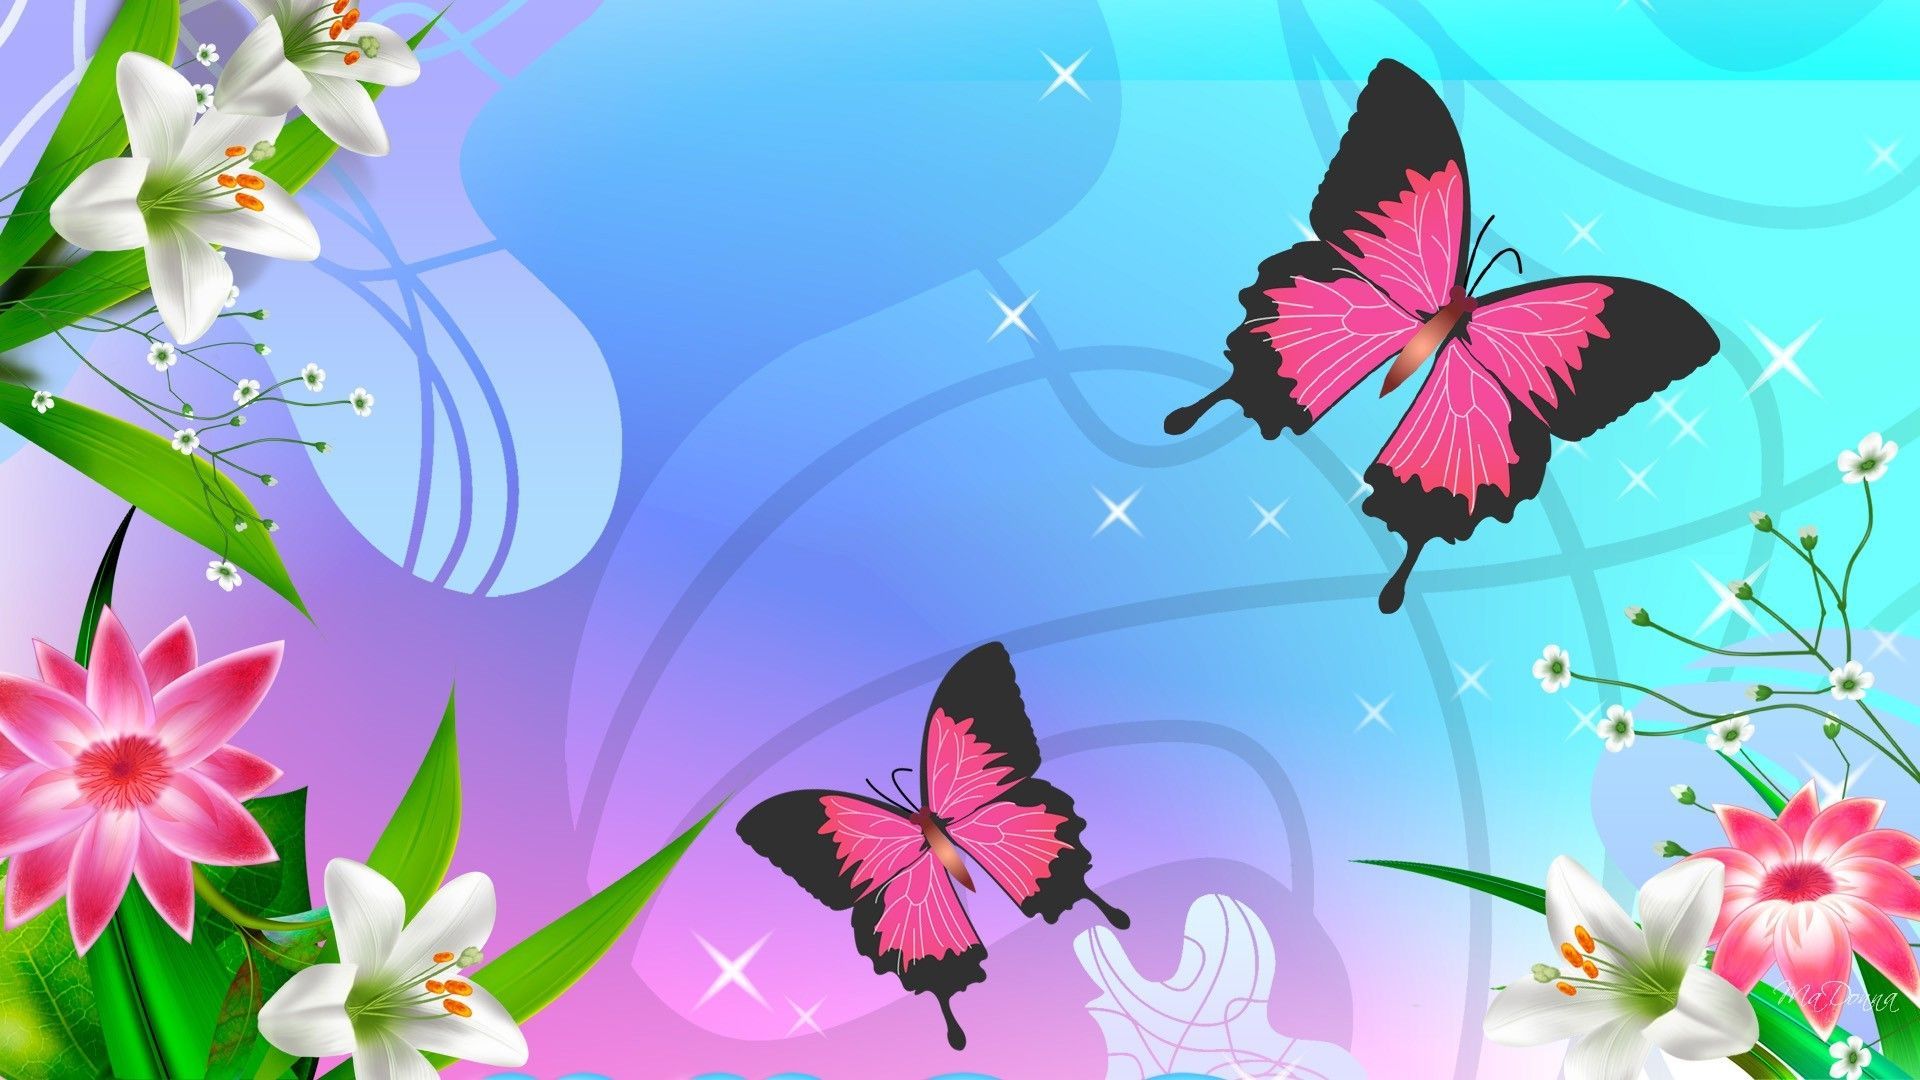 Download From Cute Butterfly Wallpaper 1920x1080 Full HD Backgrounds